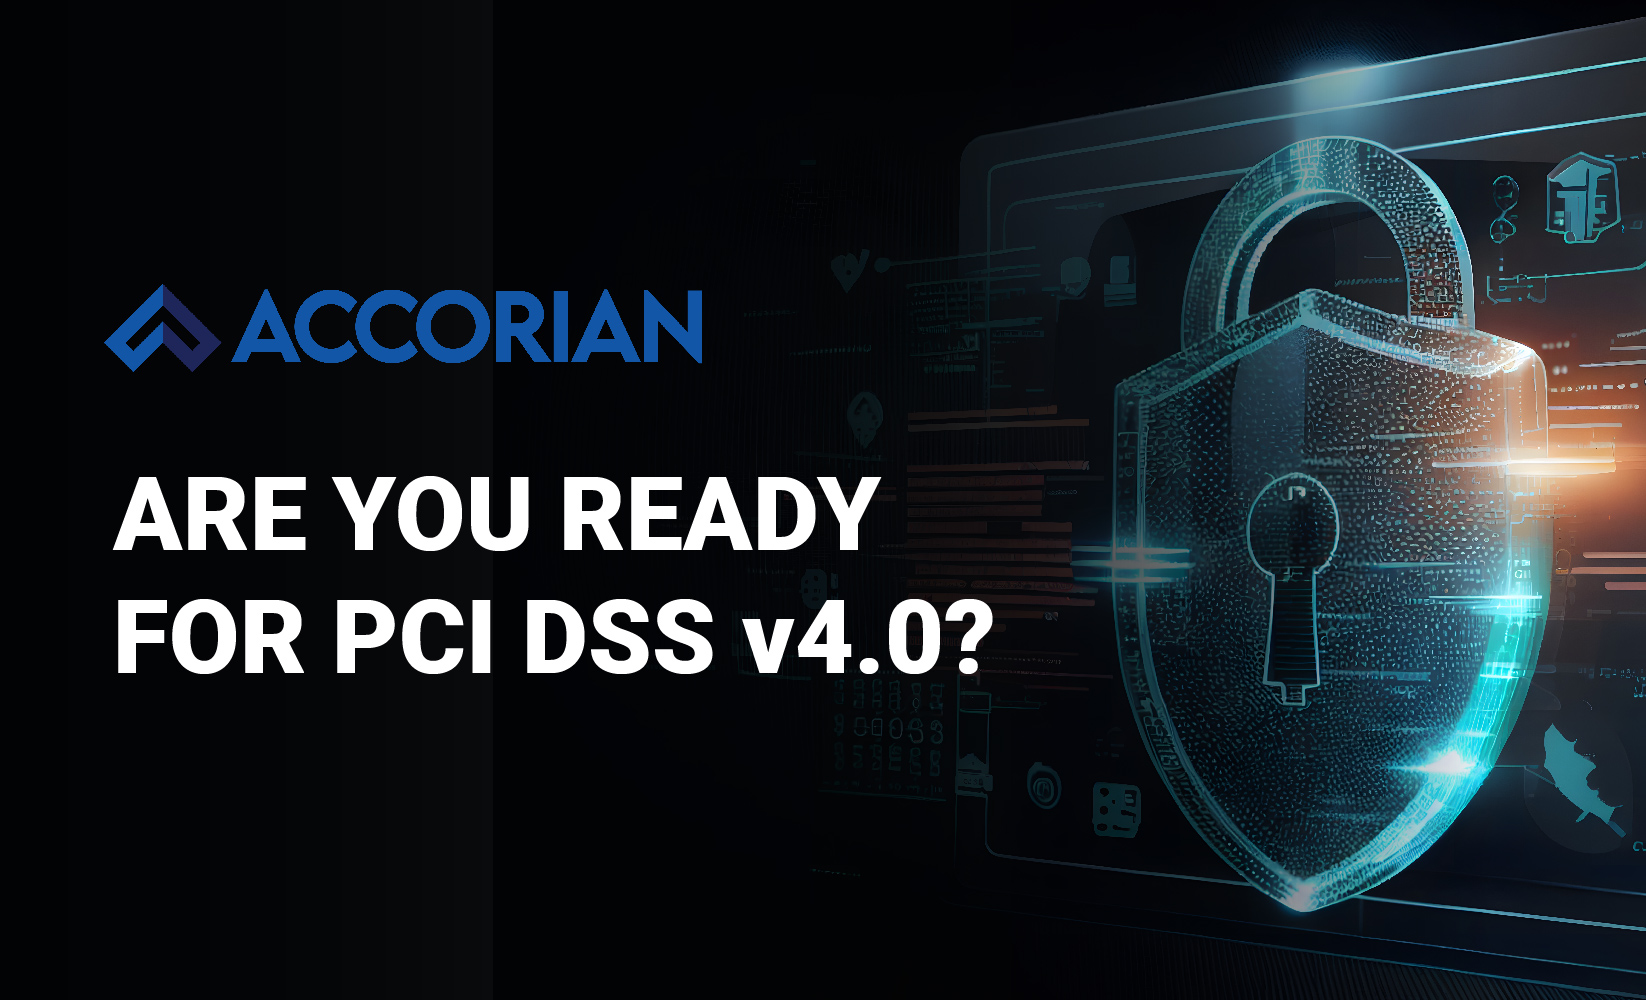 Are You Ready For PCI DSS v4.0?